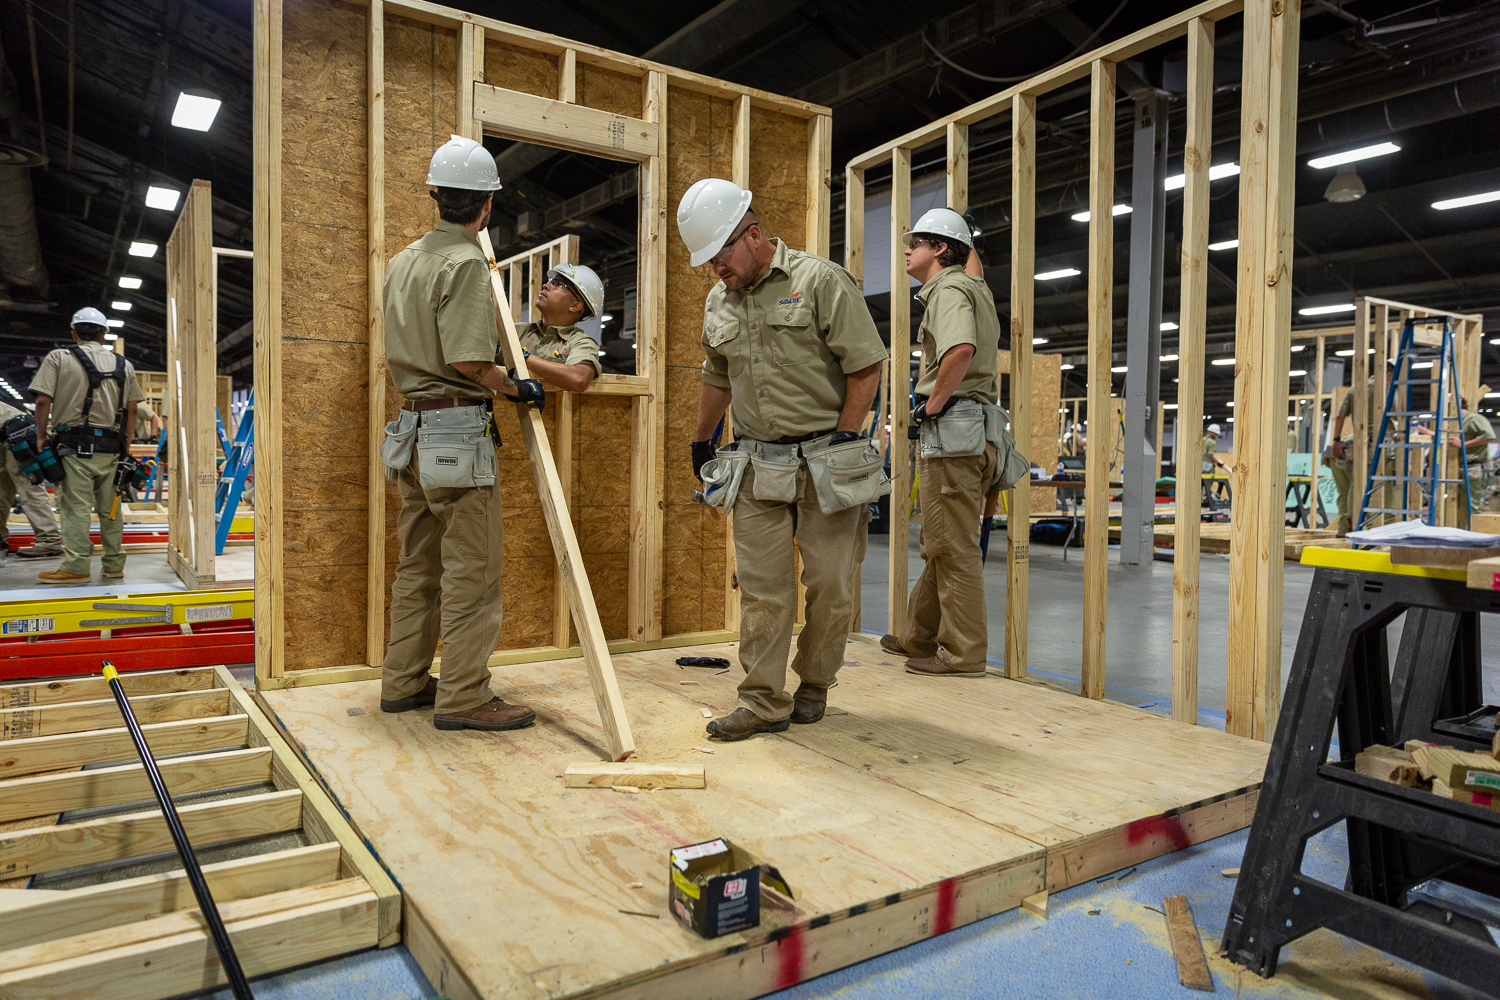 skillsusa builds a strong foundation for the workforce